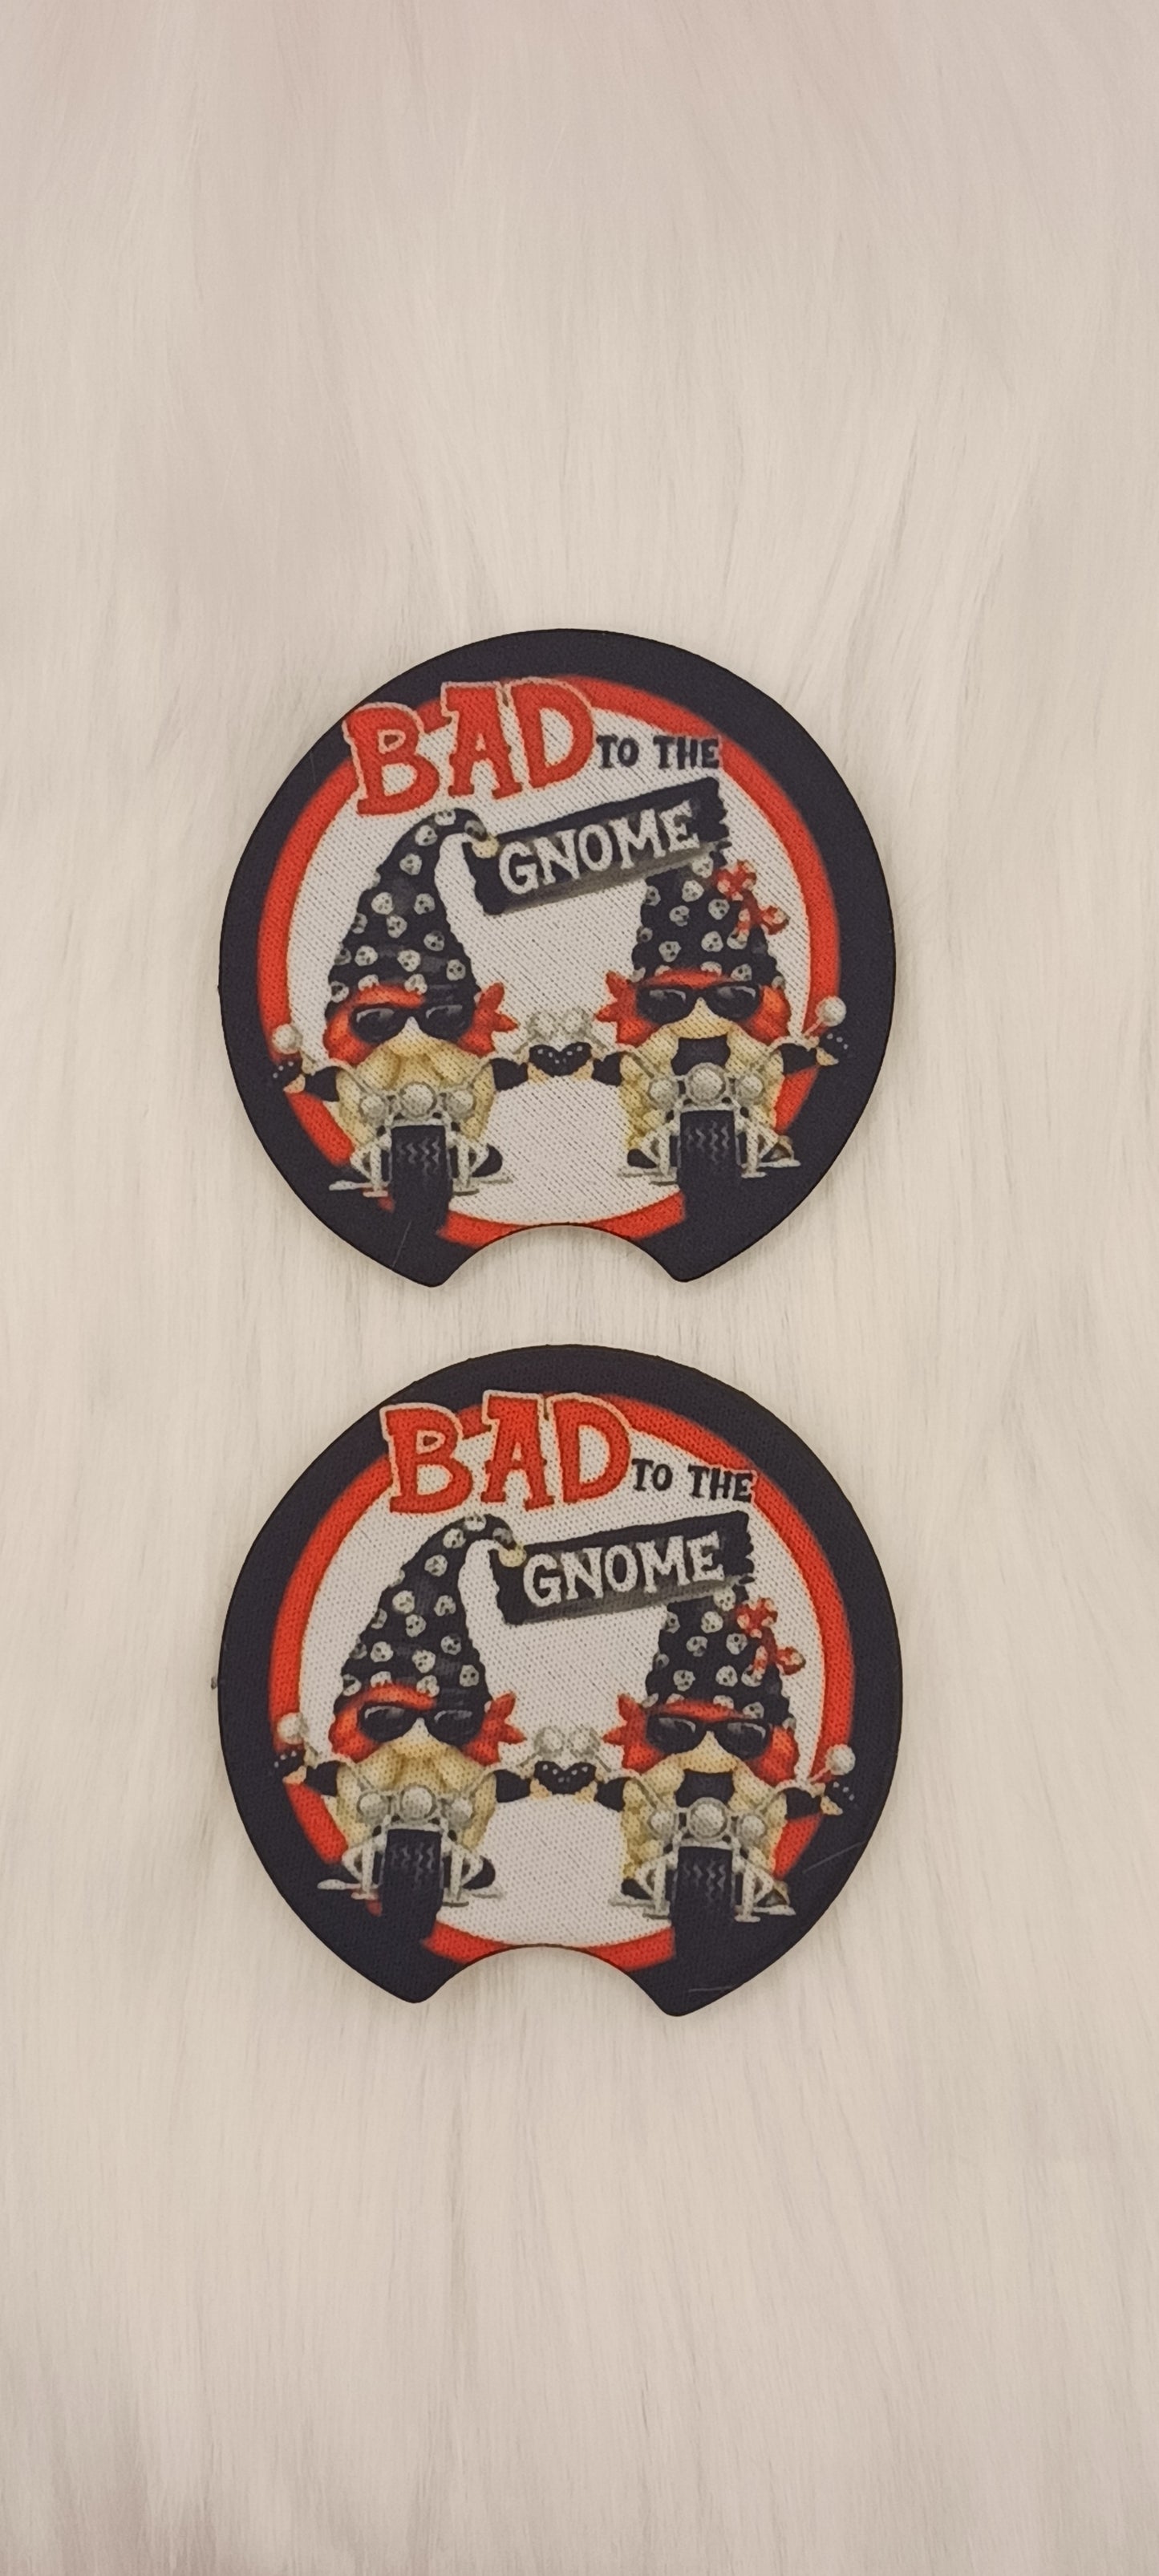 Bad to the gnome car coasters